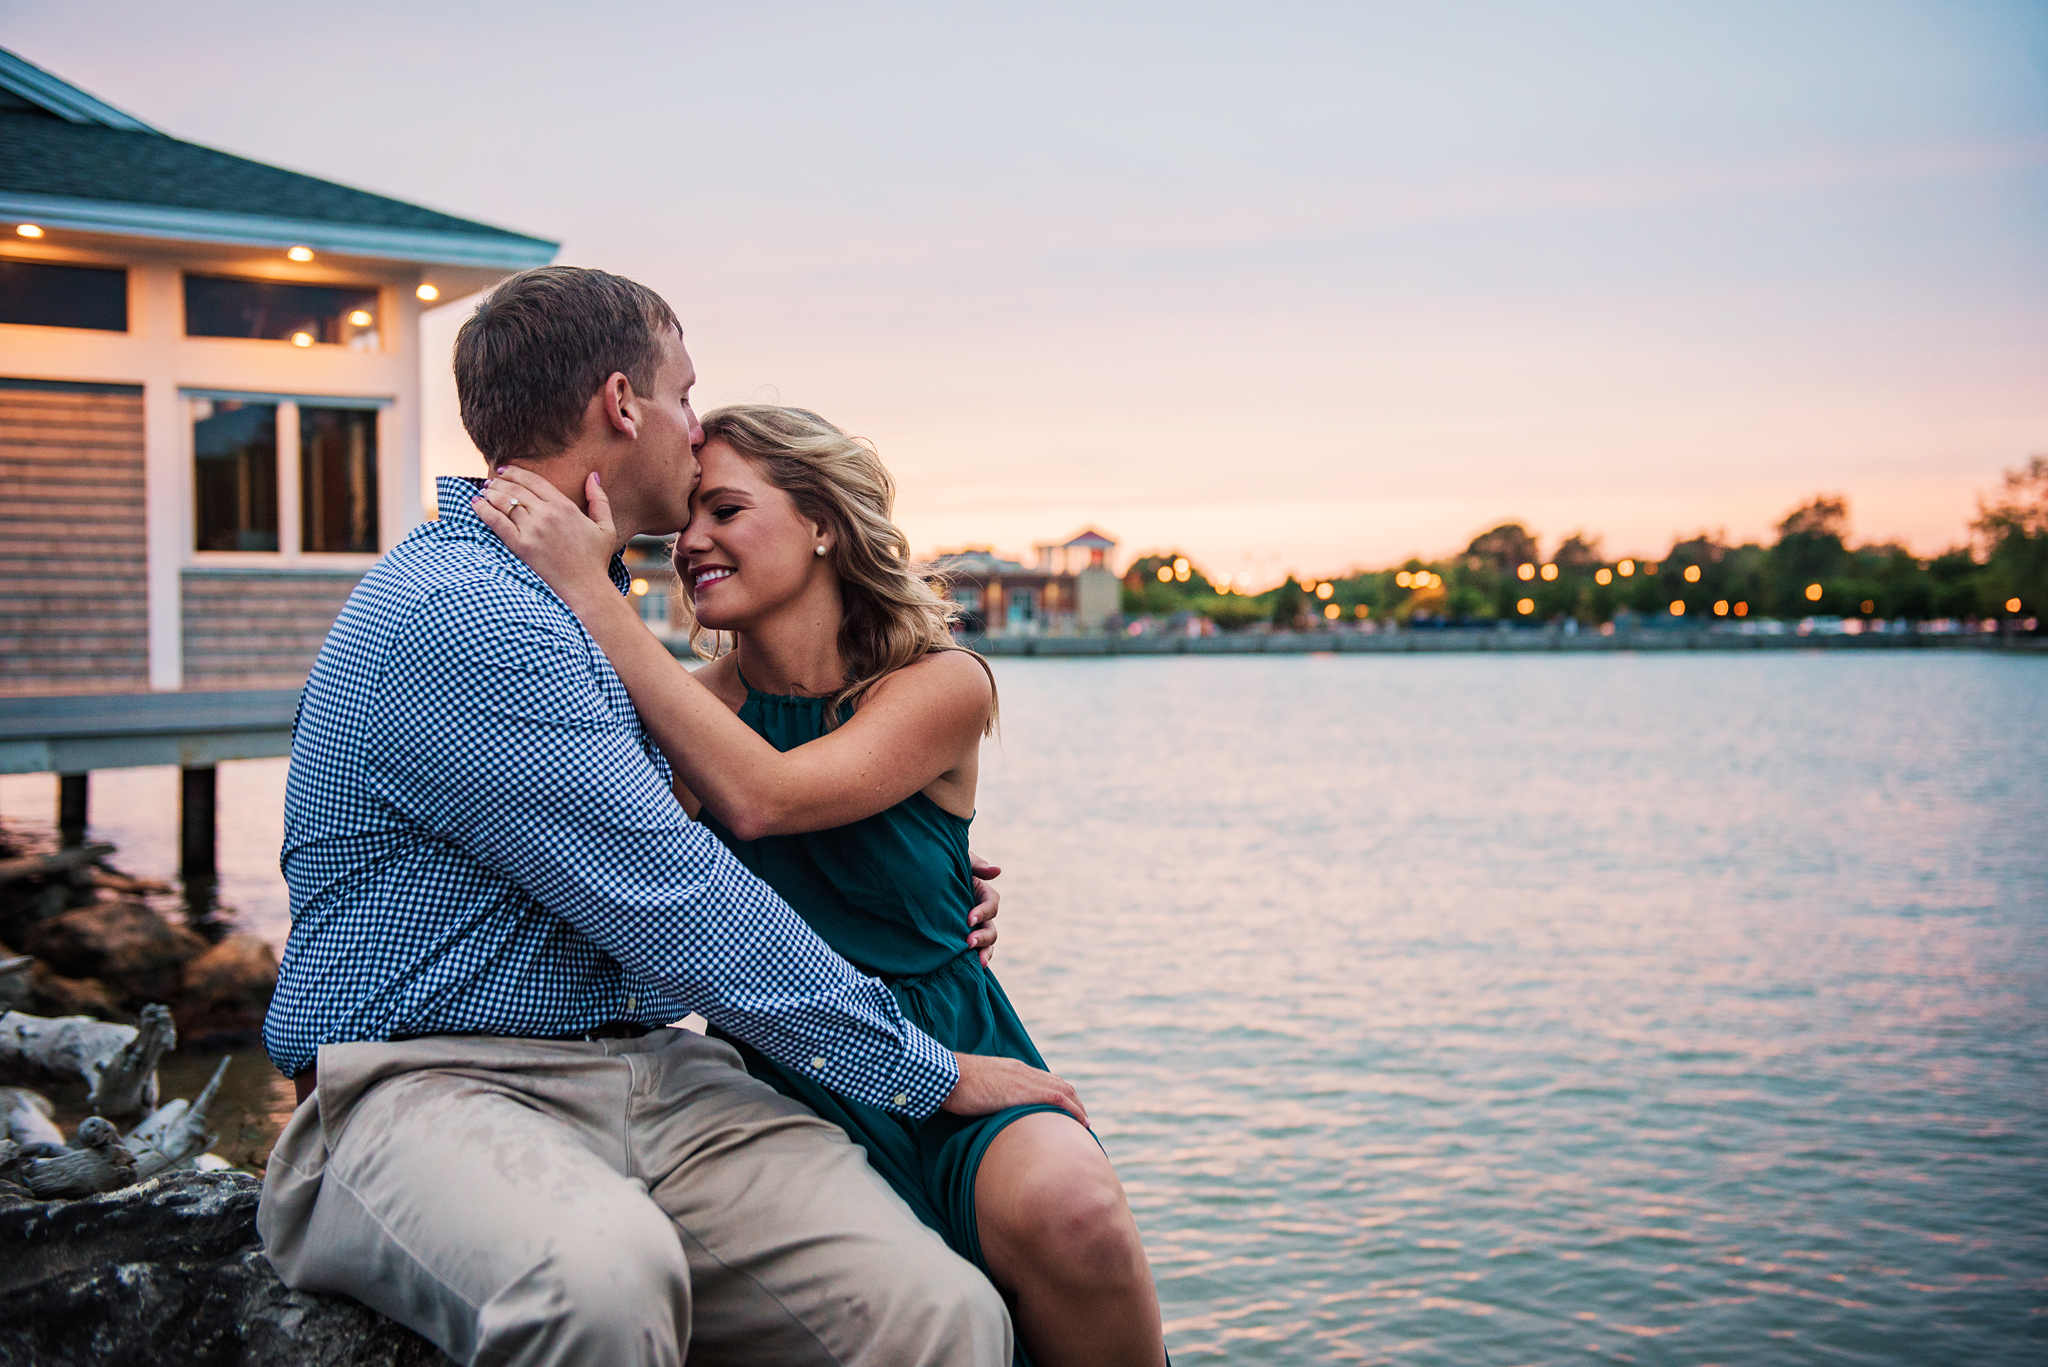 George_Eastman_House_Rochester_Yacht_Club_Rochester_Engagement_Session_JILL_STUDIO_Rochester_NY_Photographer_DSC_8309.jpg